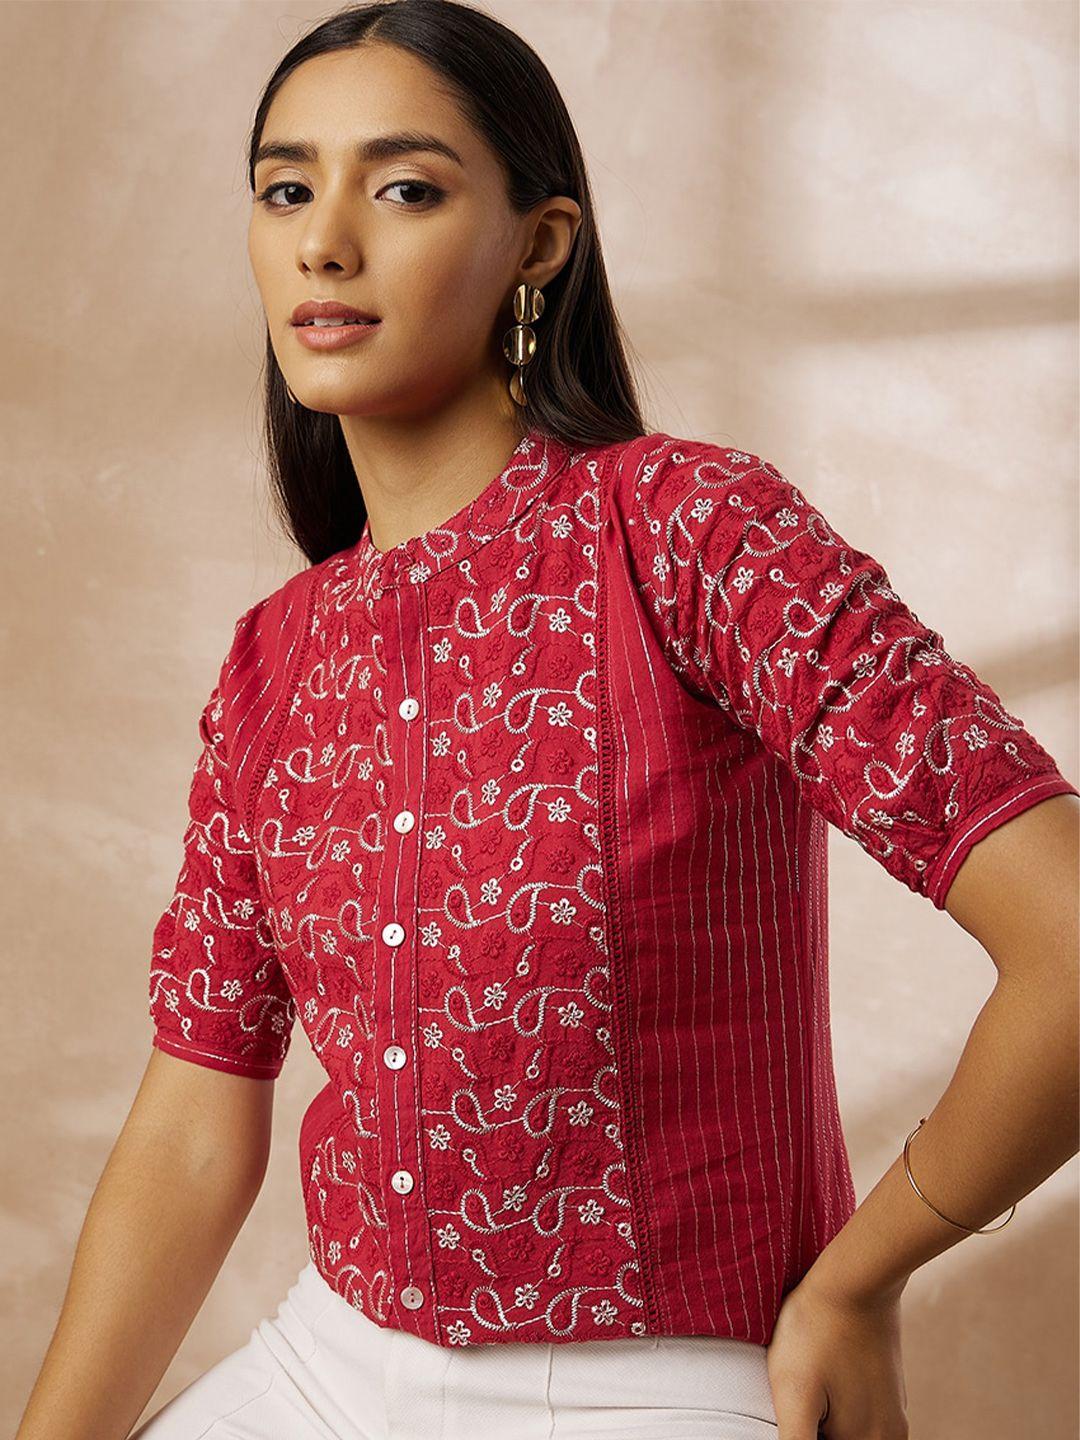 all about you floral embroidered mandarin collar cotton shirt style top